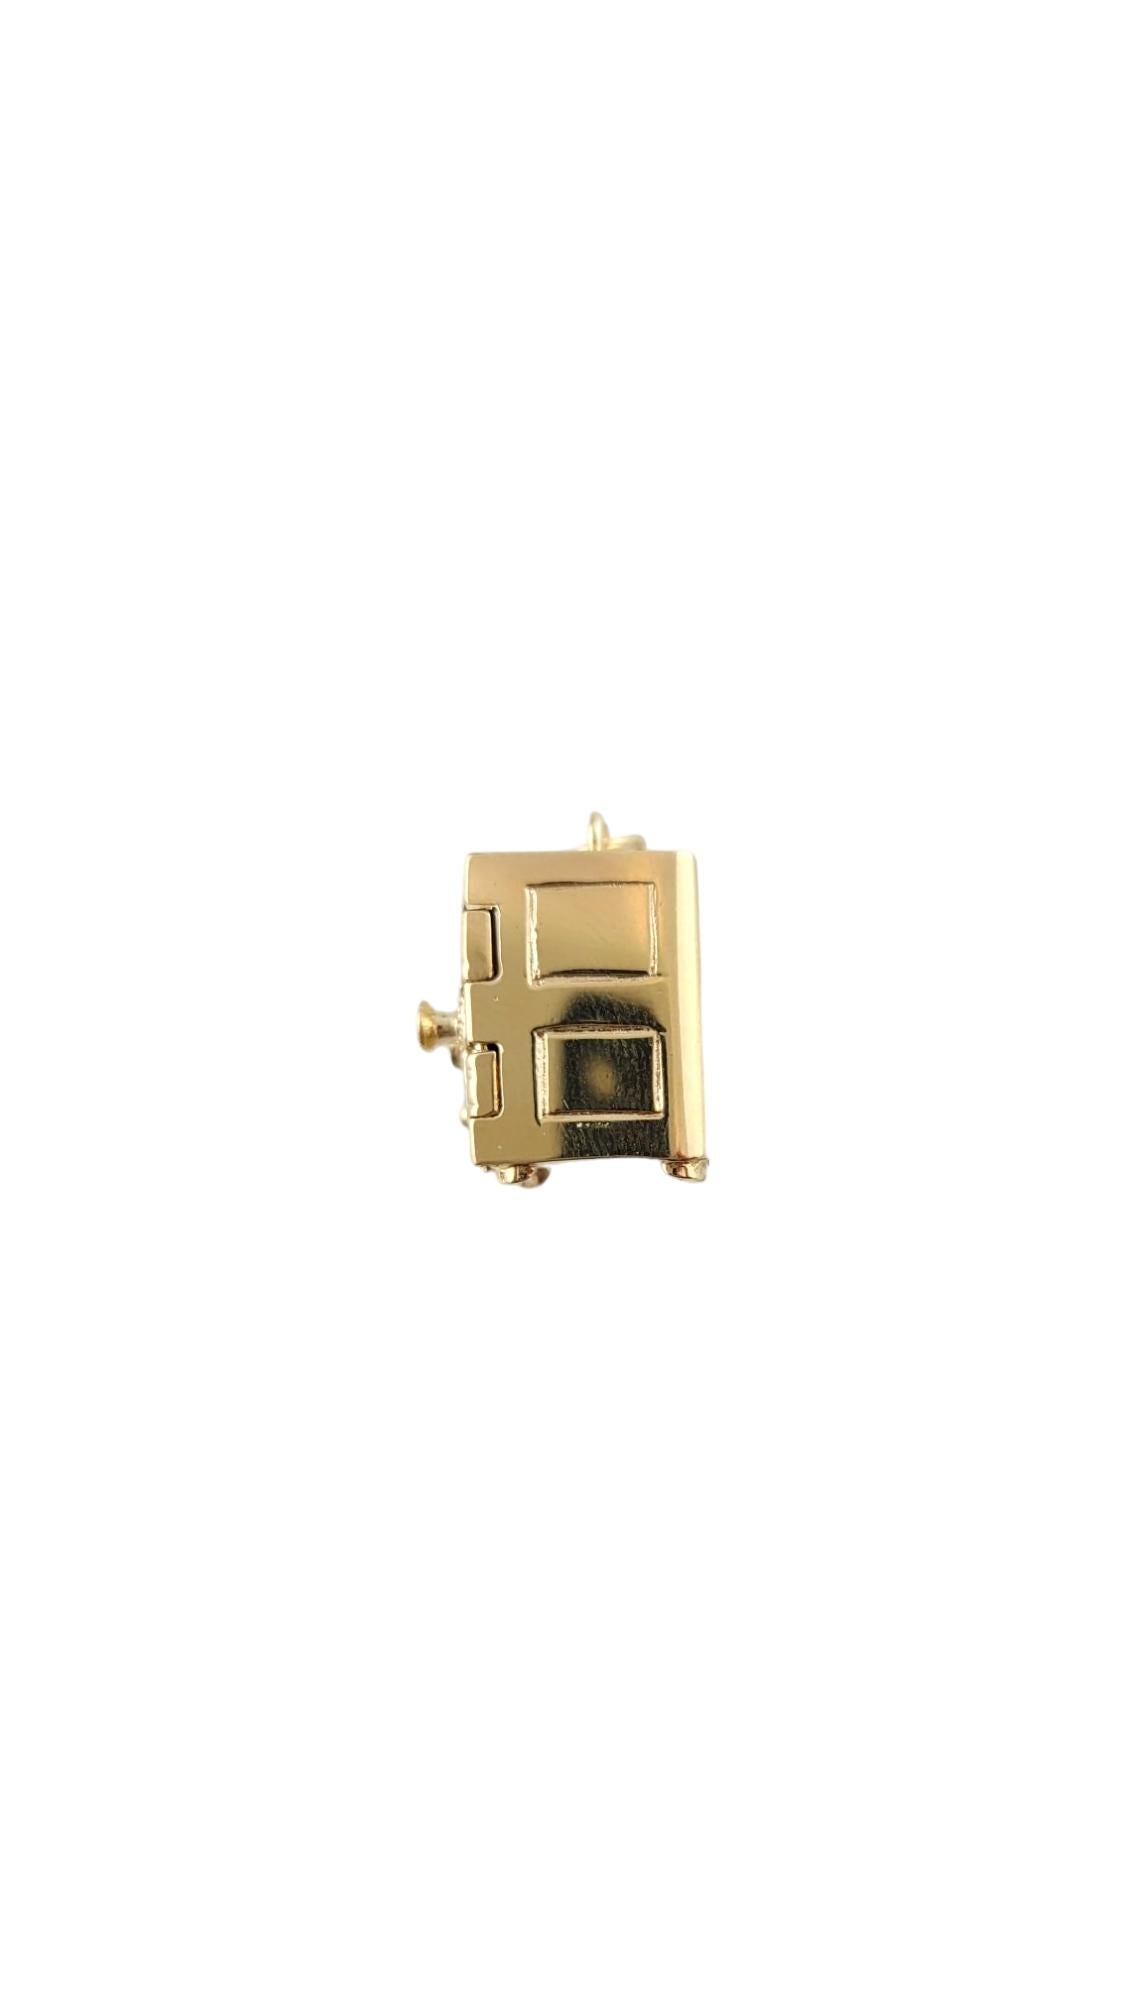 14K Yellow Gold Articulating Safe Charm #16790 For Sale 2